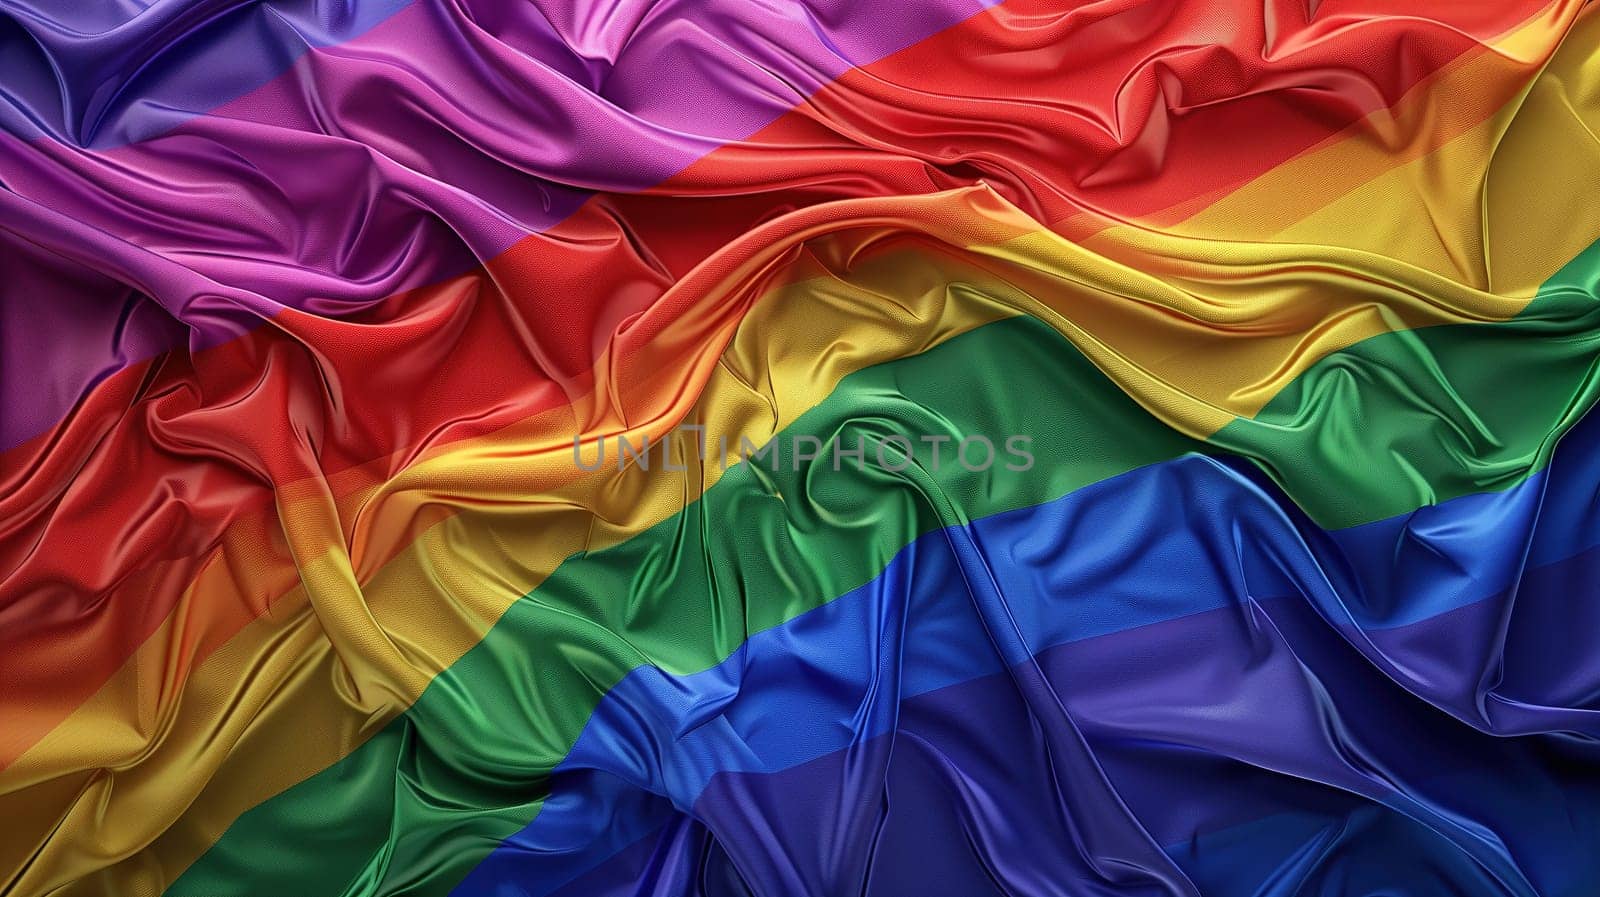 A full-frame close-up captures the rich colors and dynamic ripples of a Rainbow Pride Flag, symbolizing LGBT diversity and unity. The flags fabric showcases the movement, reflecting a moment of celebration and solidarity.